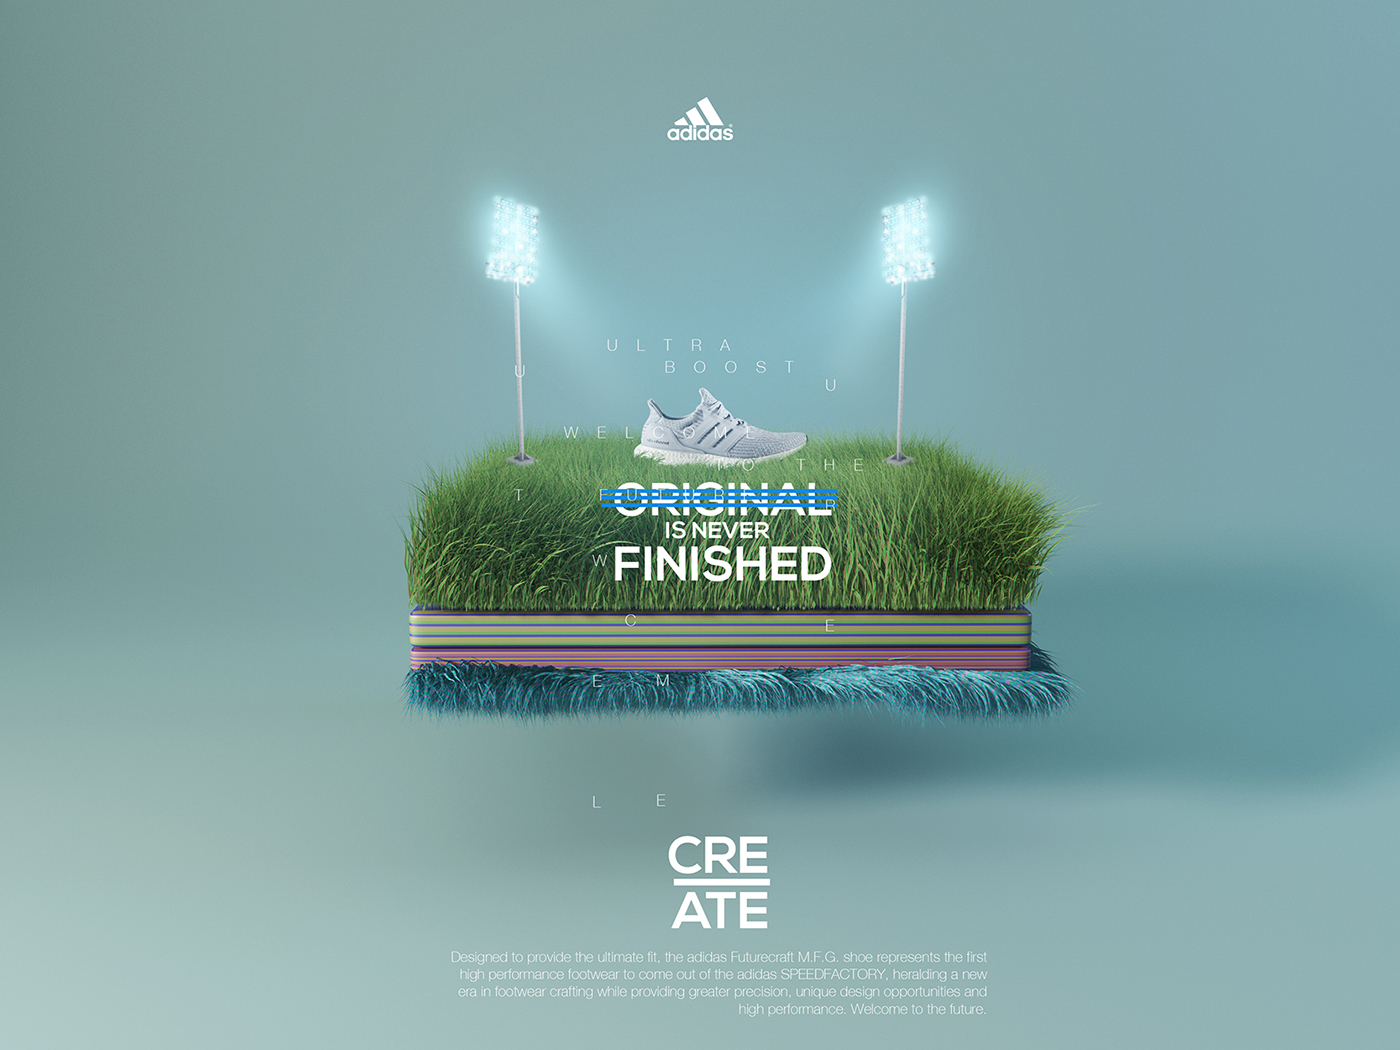 adidas abstract NMD climacool ultraboost c4d adidas original sneakers footwear Visual Communication